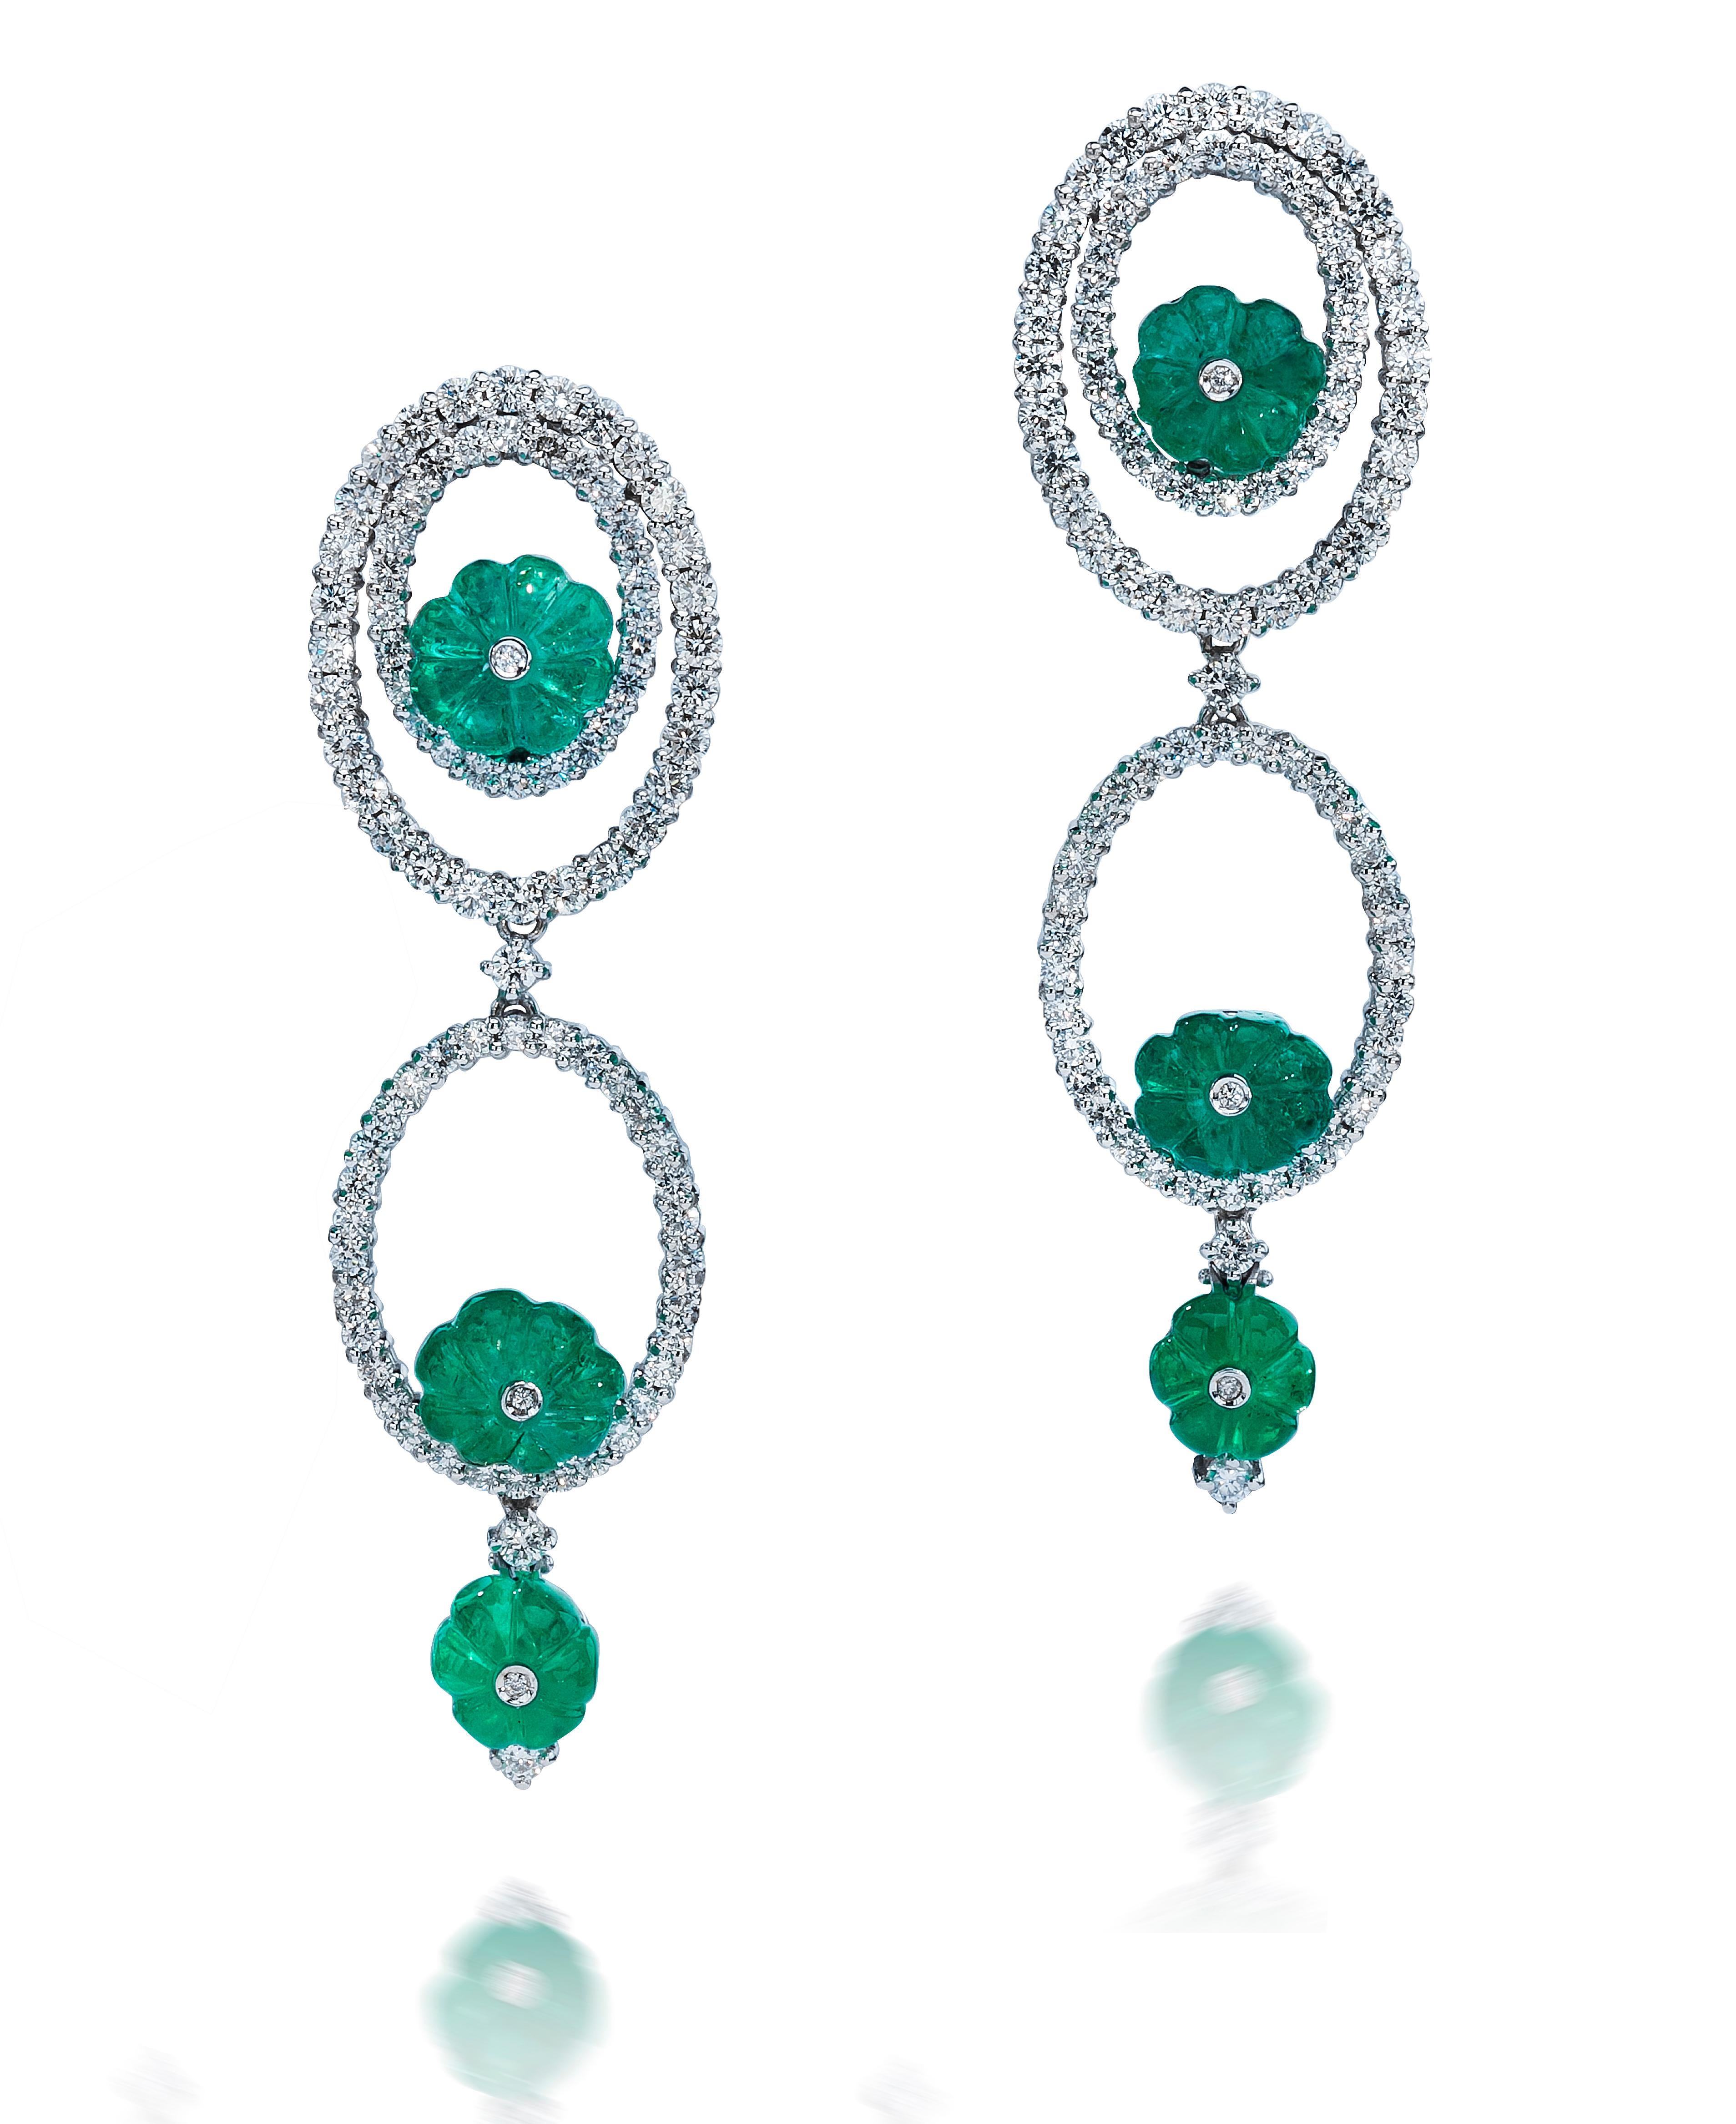 Mixed Cut Andreoli Carved Emerald Diamond 18 Karat White Gold Earrings For Sale